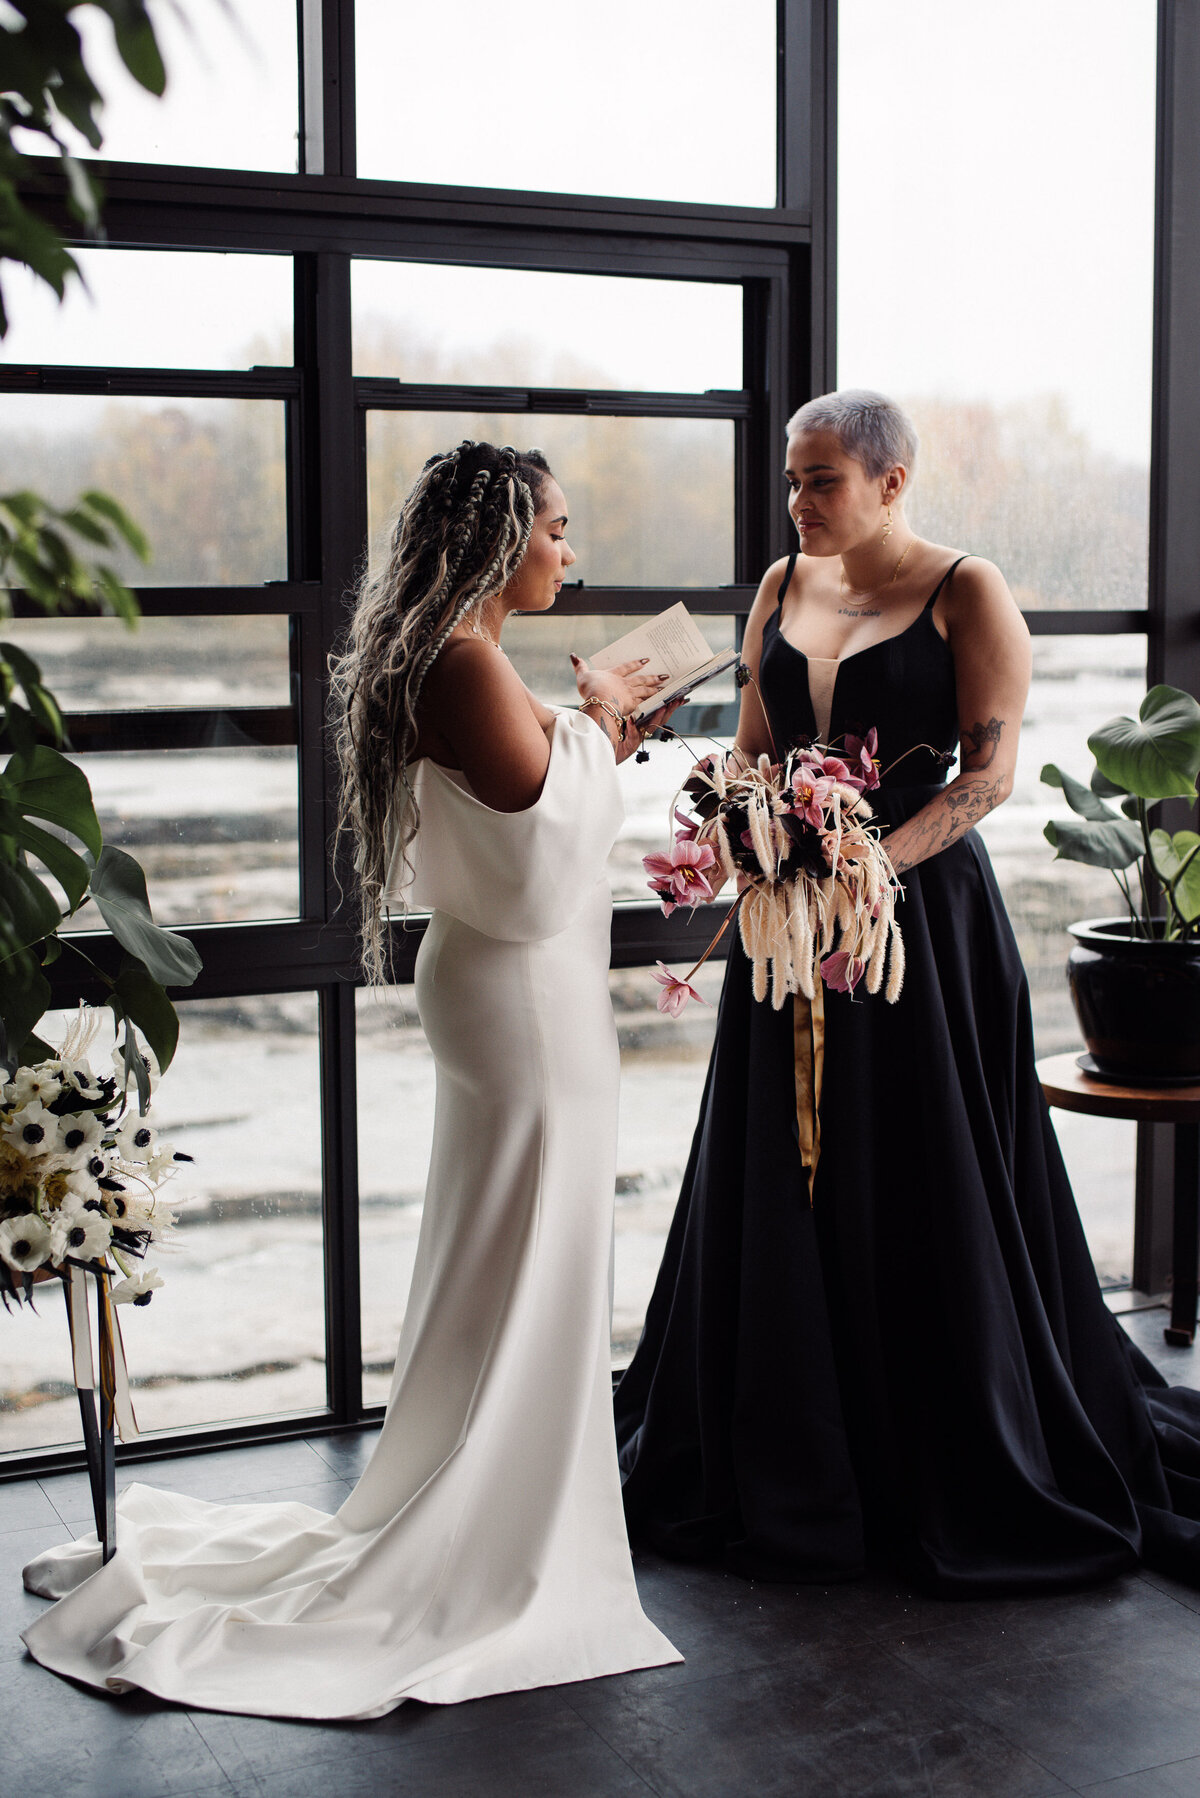 Modern and chic wedding with Black wedding dress with flowers by Nectar and Root. At waterworks in Winooski, VT. Wedding planned by Jaclyn Watson Events.